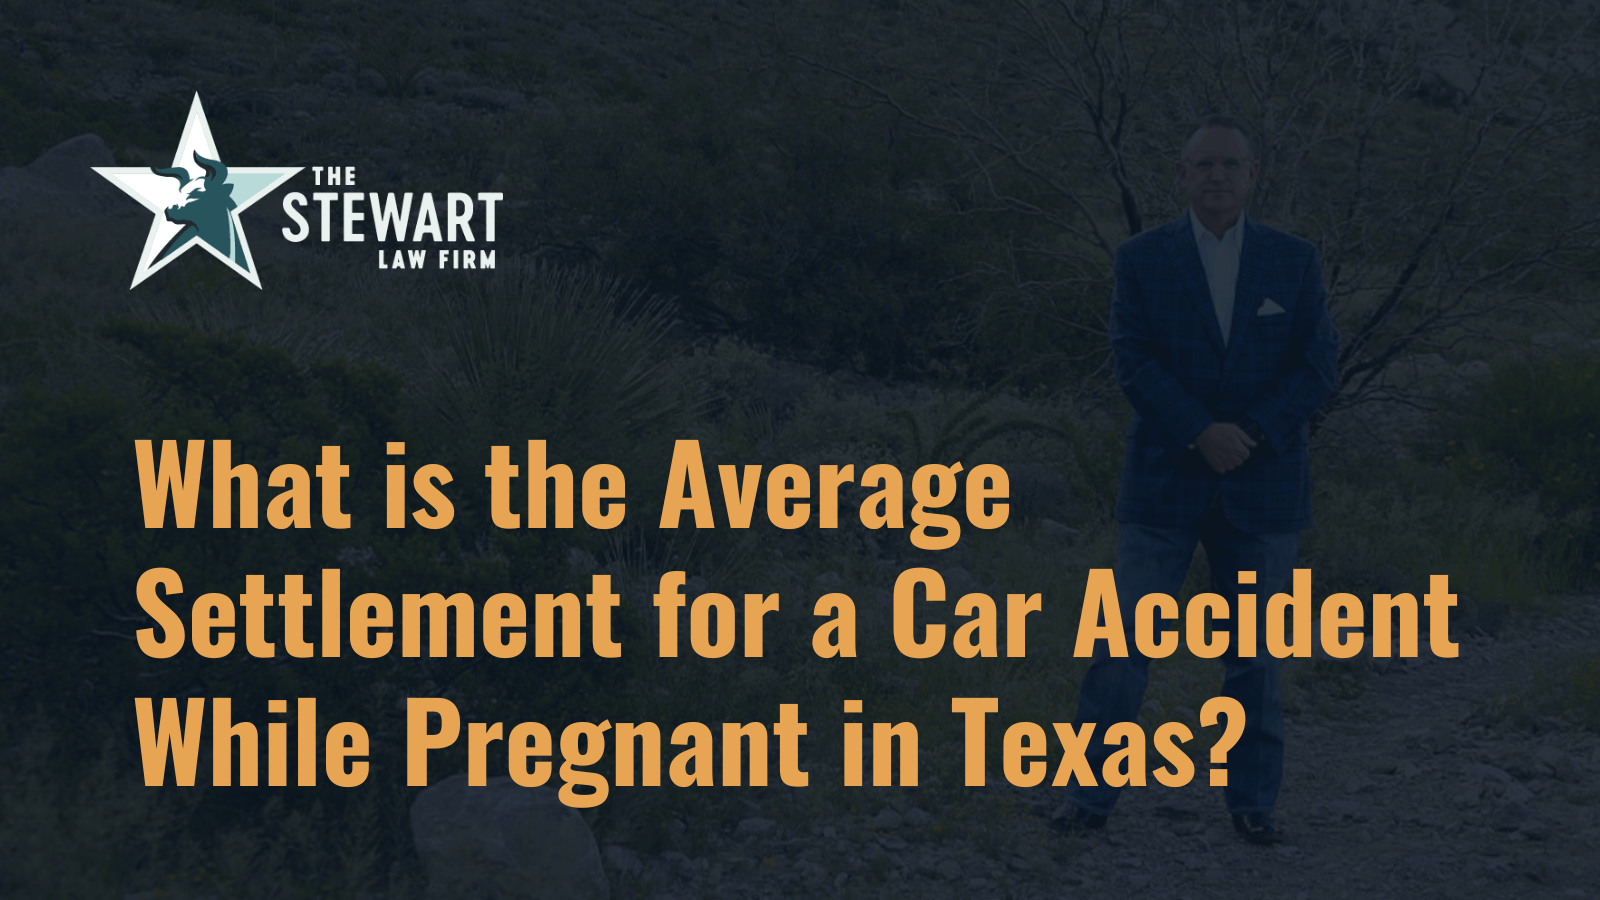 What is the Average Settlement for a Car Accident While Pregnant in Texas?